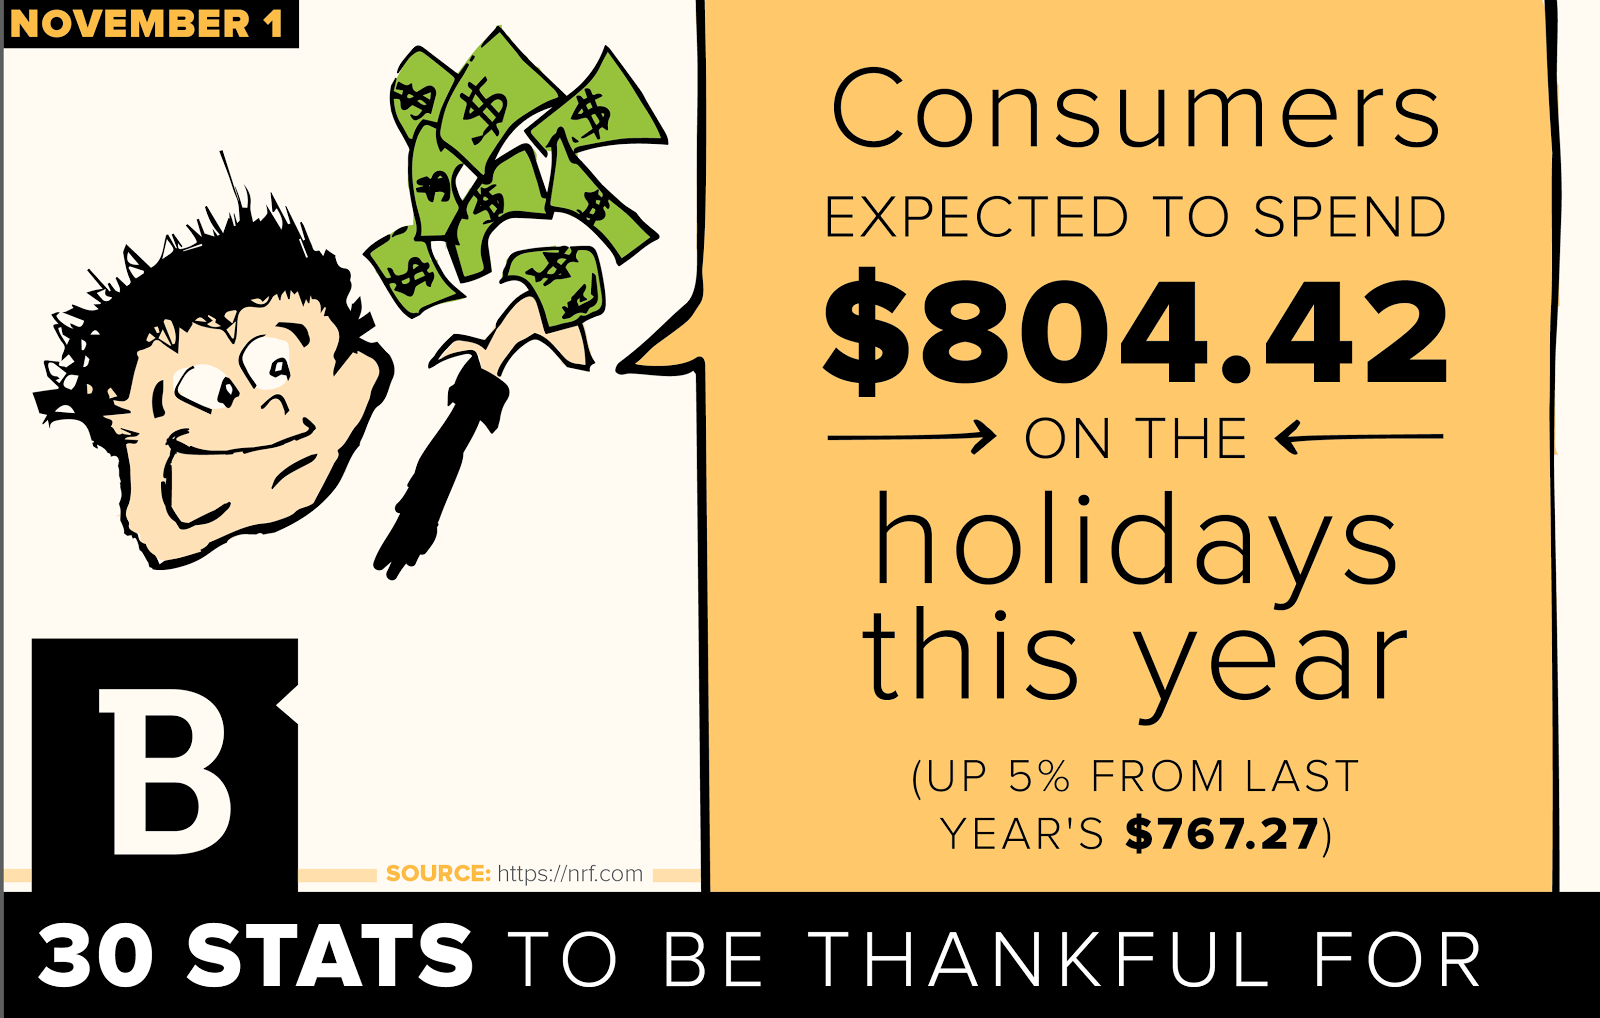 The National Retail Federation reports that consumers plan to spend 5 percent more on holiday gifts in 2014.